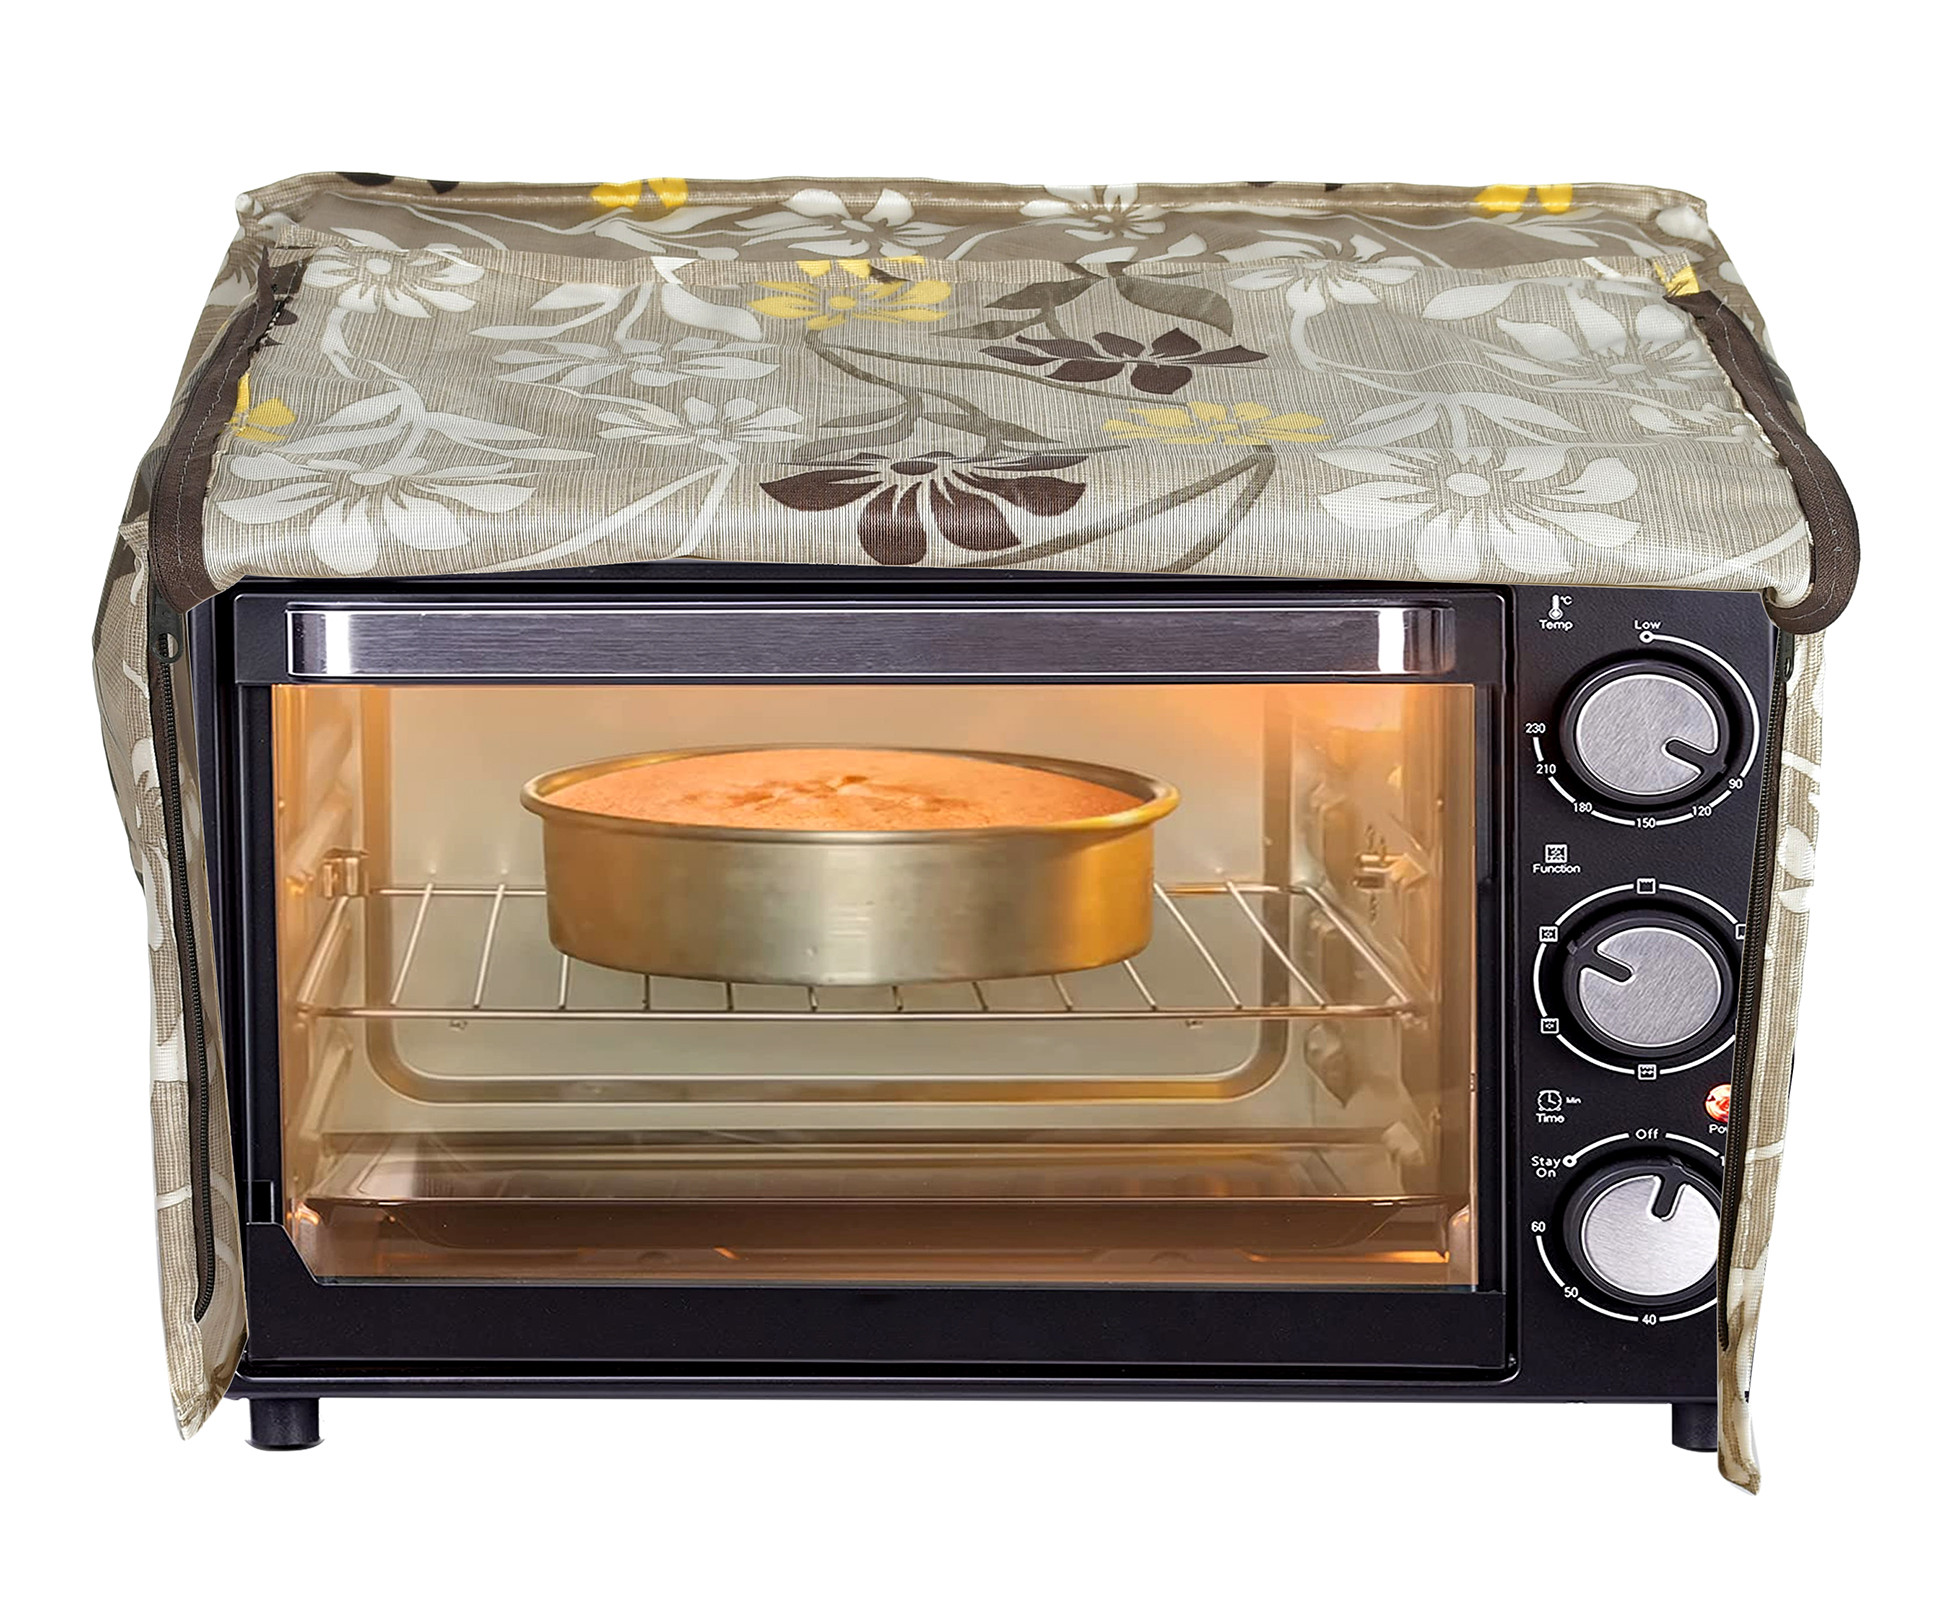 Kuber Industries Polyster Flower Printed Microwave Oven Cover,25 Ltr. (Brown)-HS43KUBMART25917